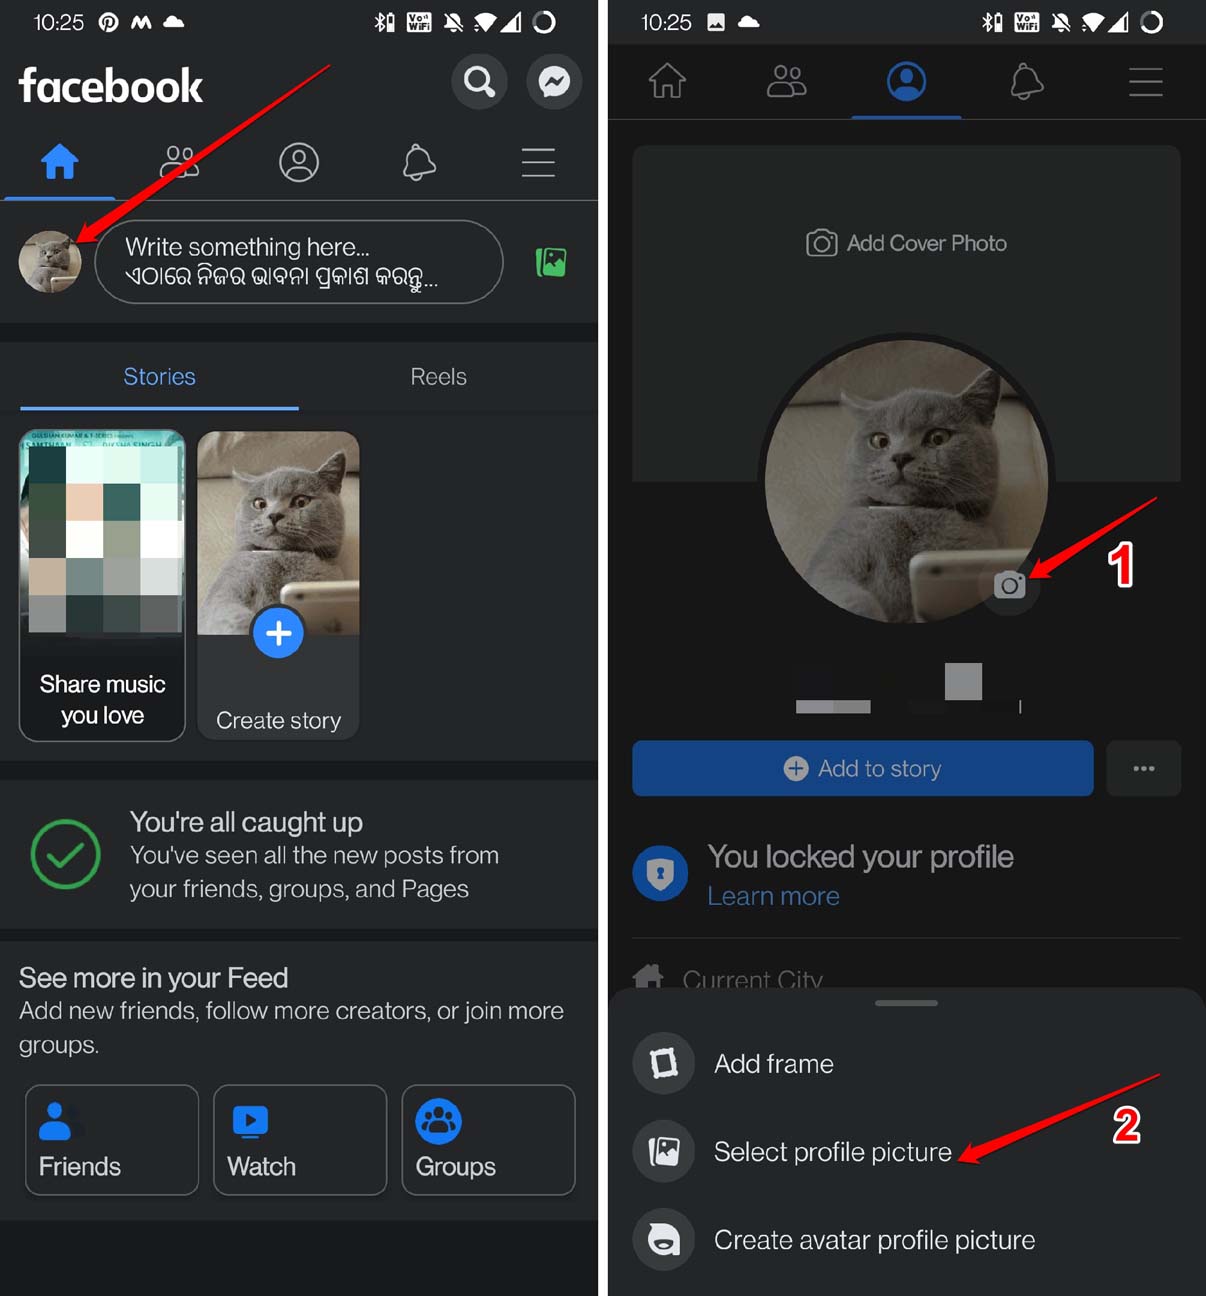 Facebook Profile Picture a GIF on Android and iOS